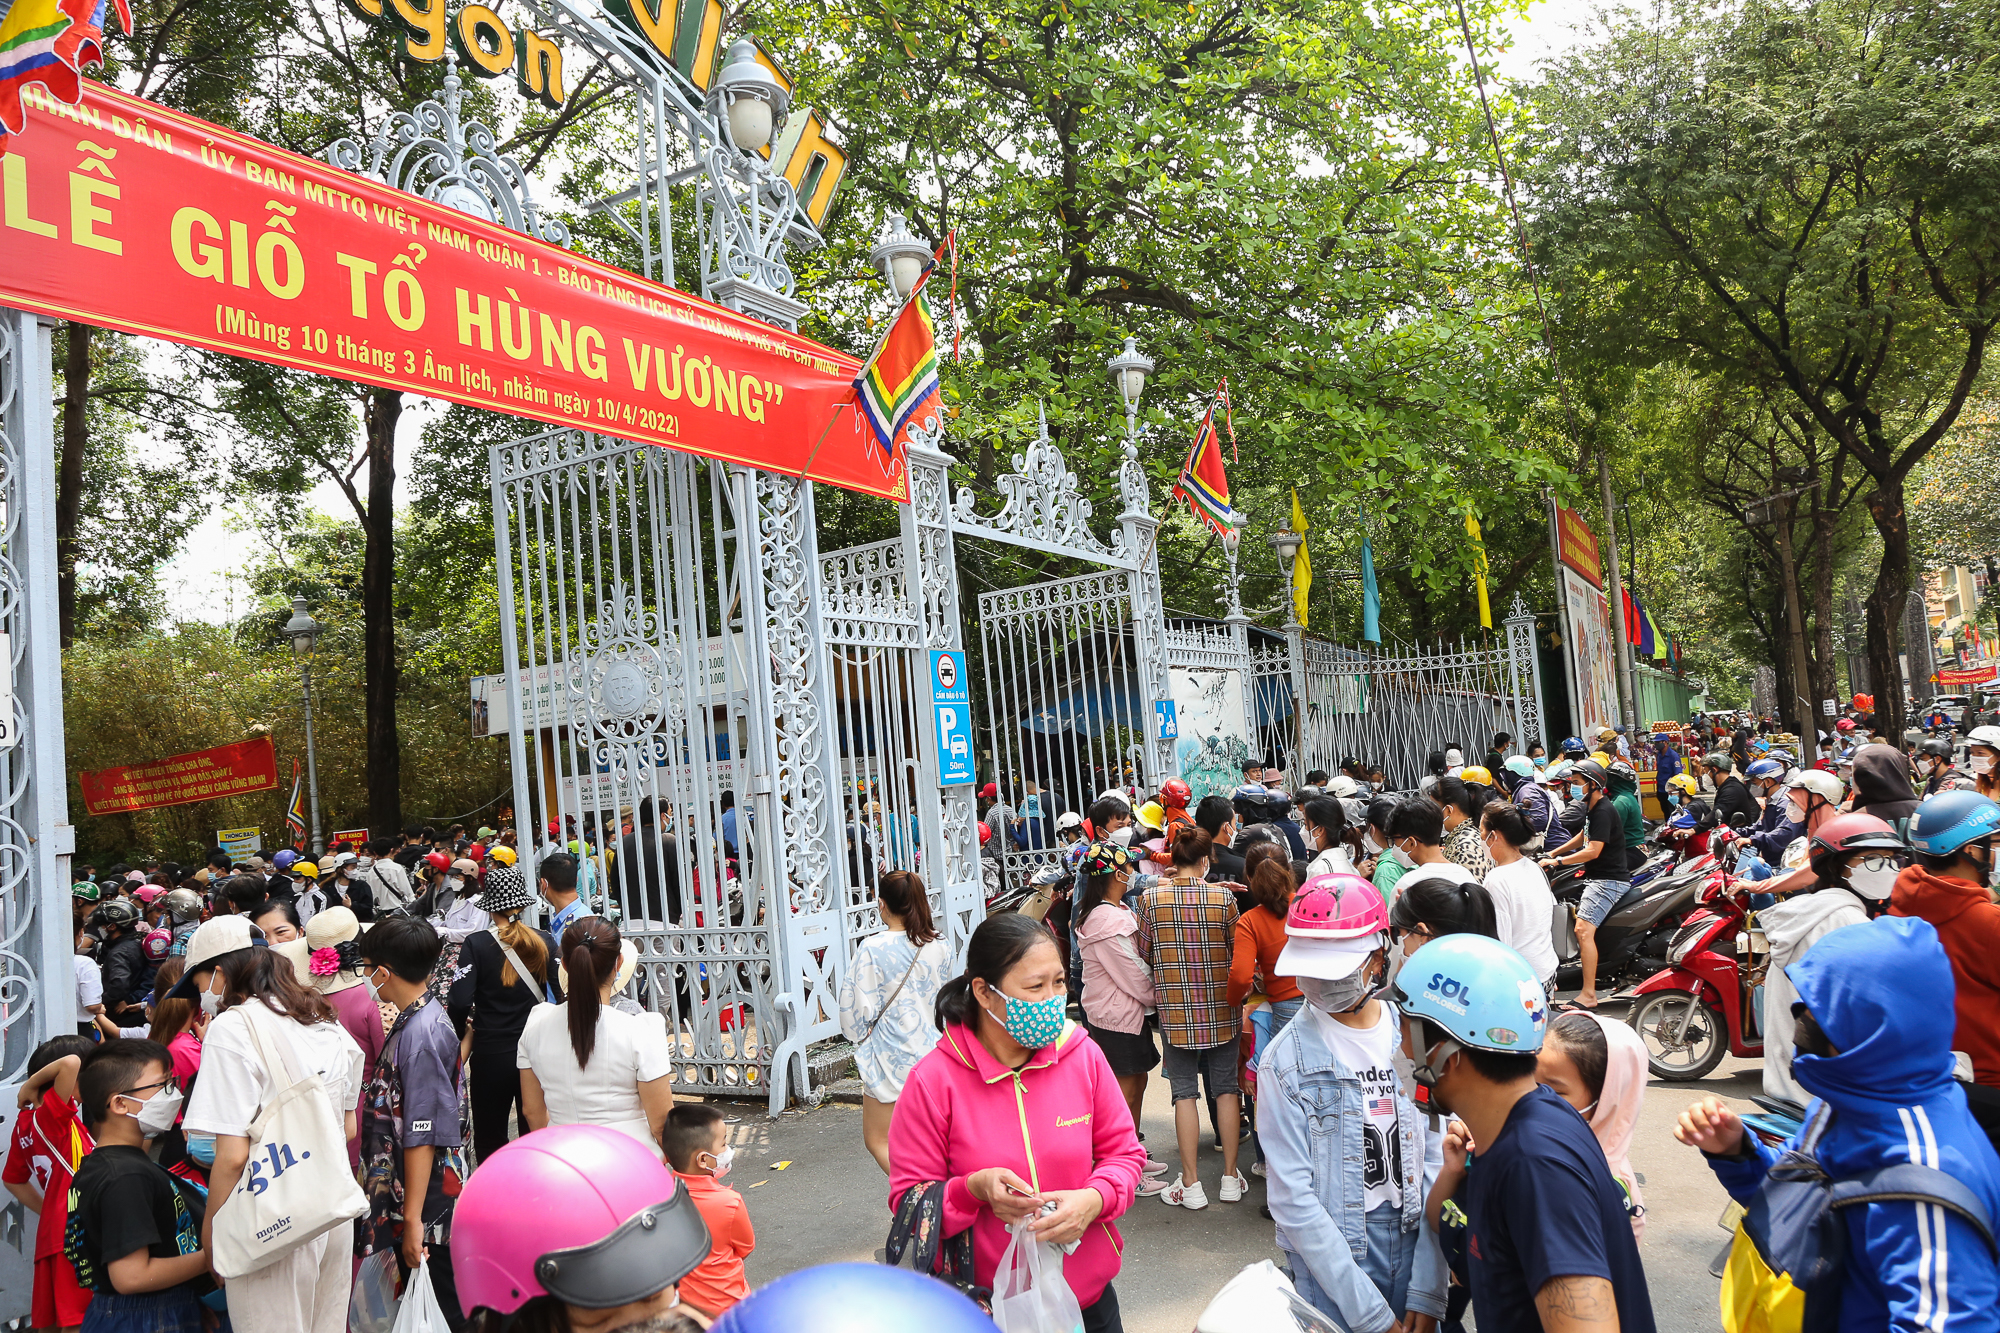 Saigon Zoo and Botanical Garden was crowded with people, guests brought suitcases to camp on the occasion of Hung King's death anniversary - Photo 1.